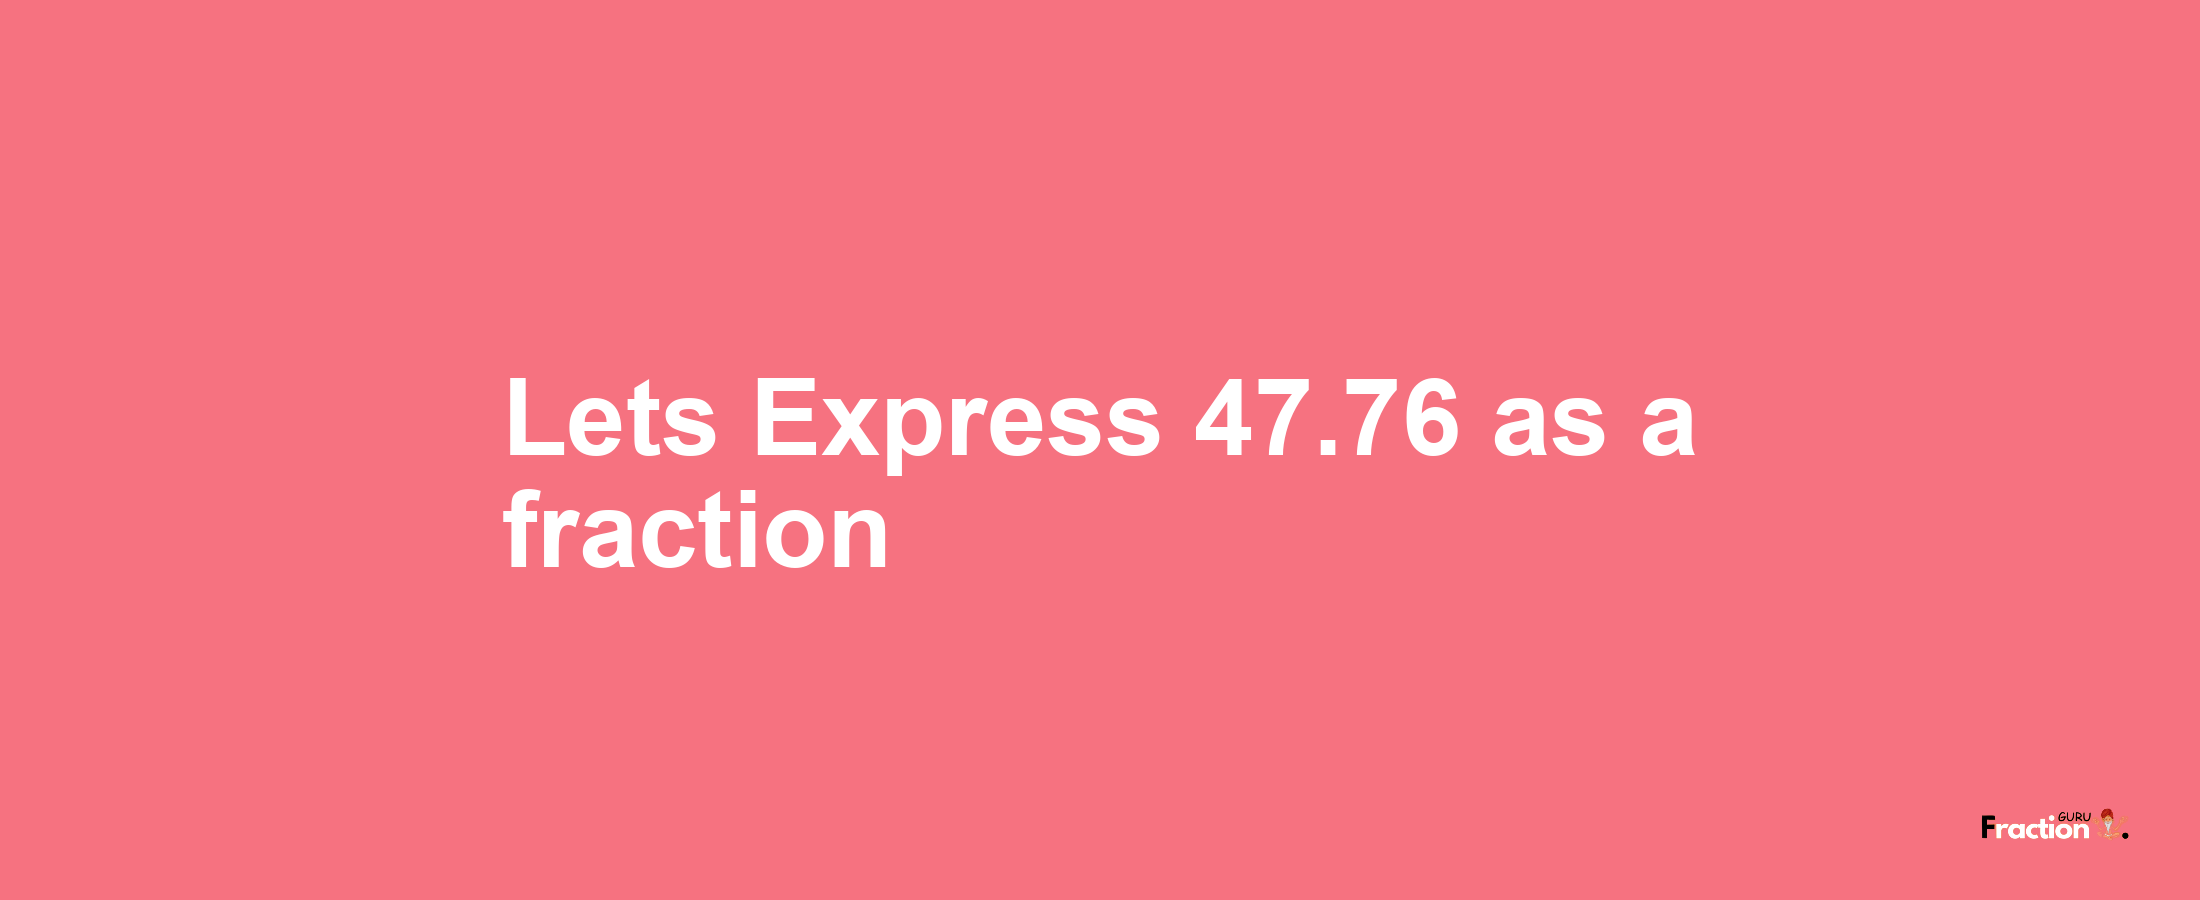 Lets Express 47.76 as afraction